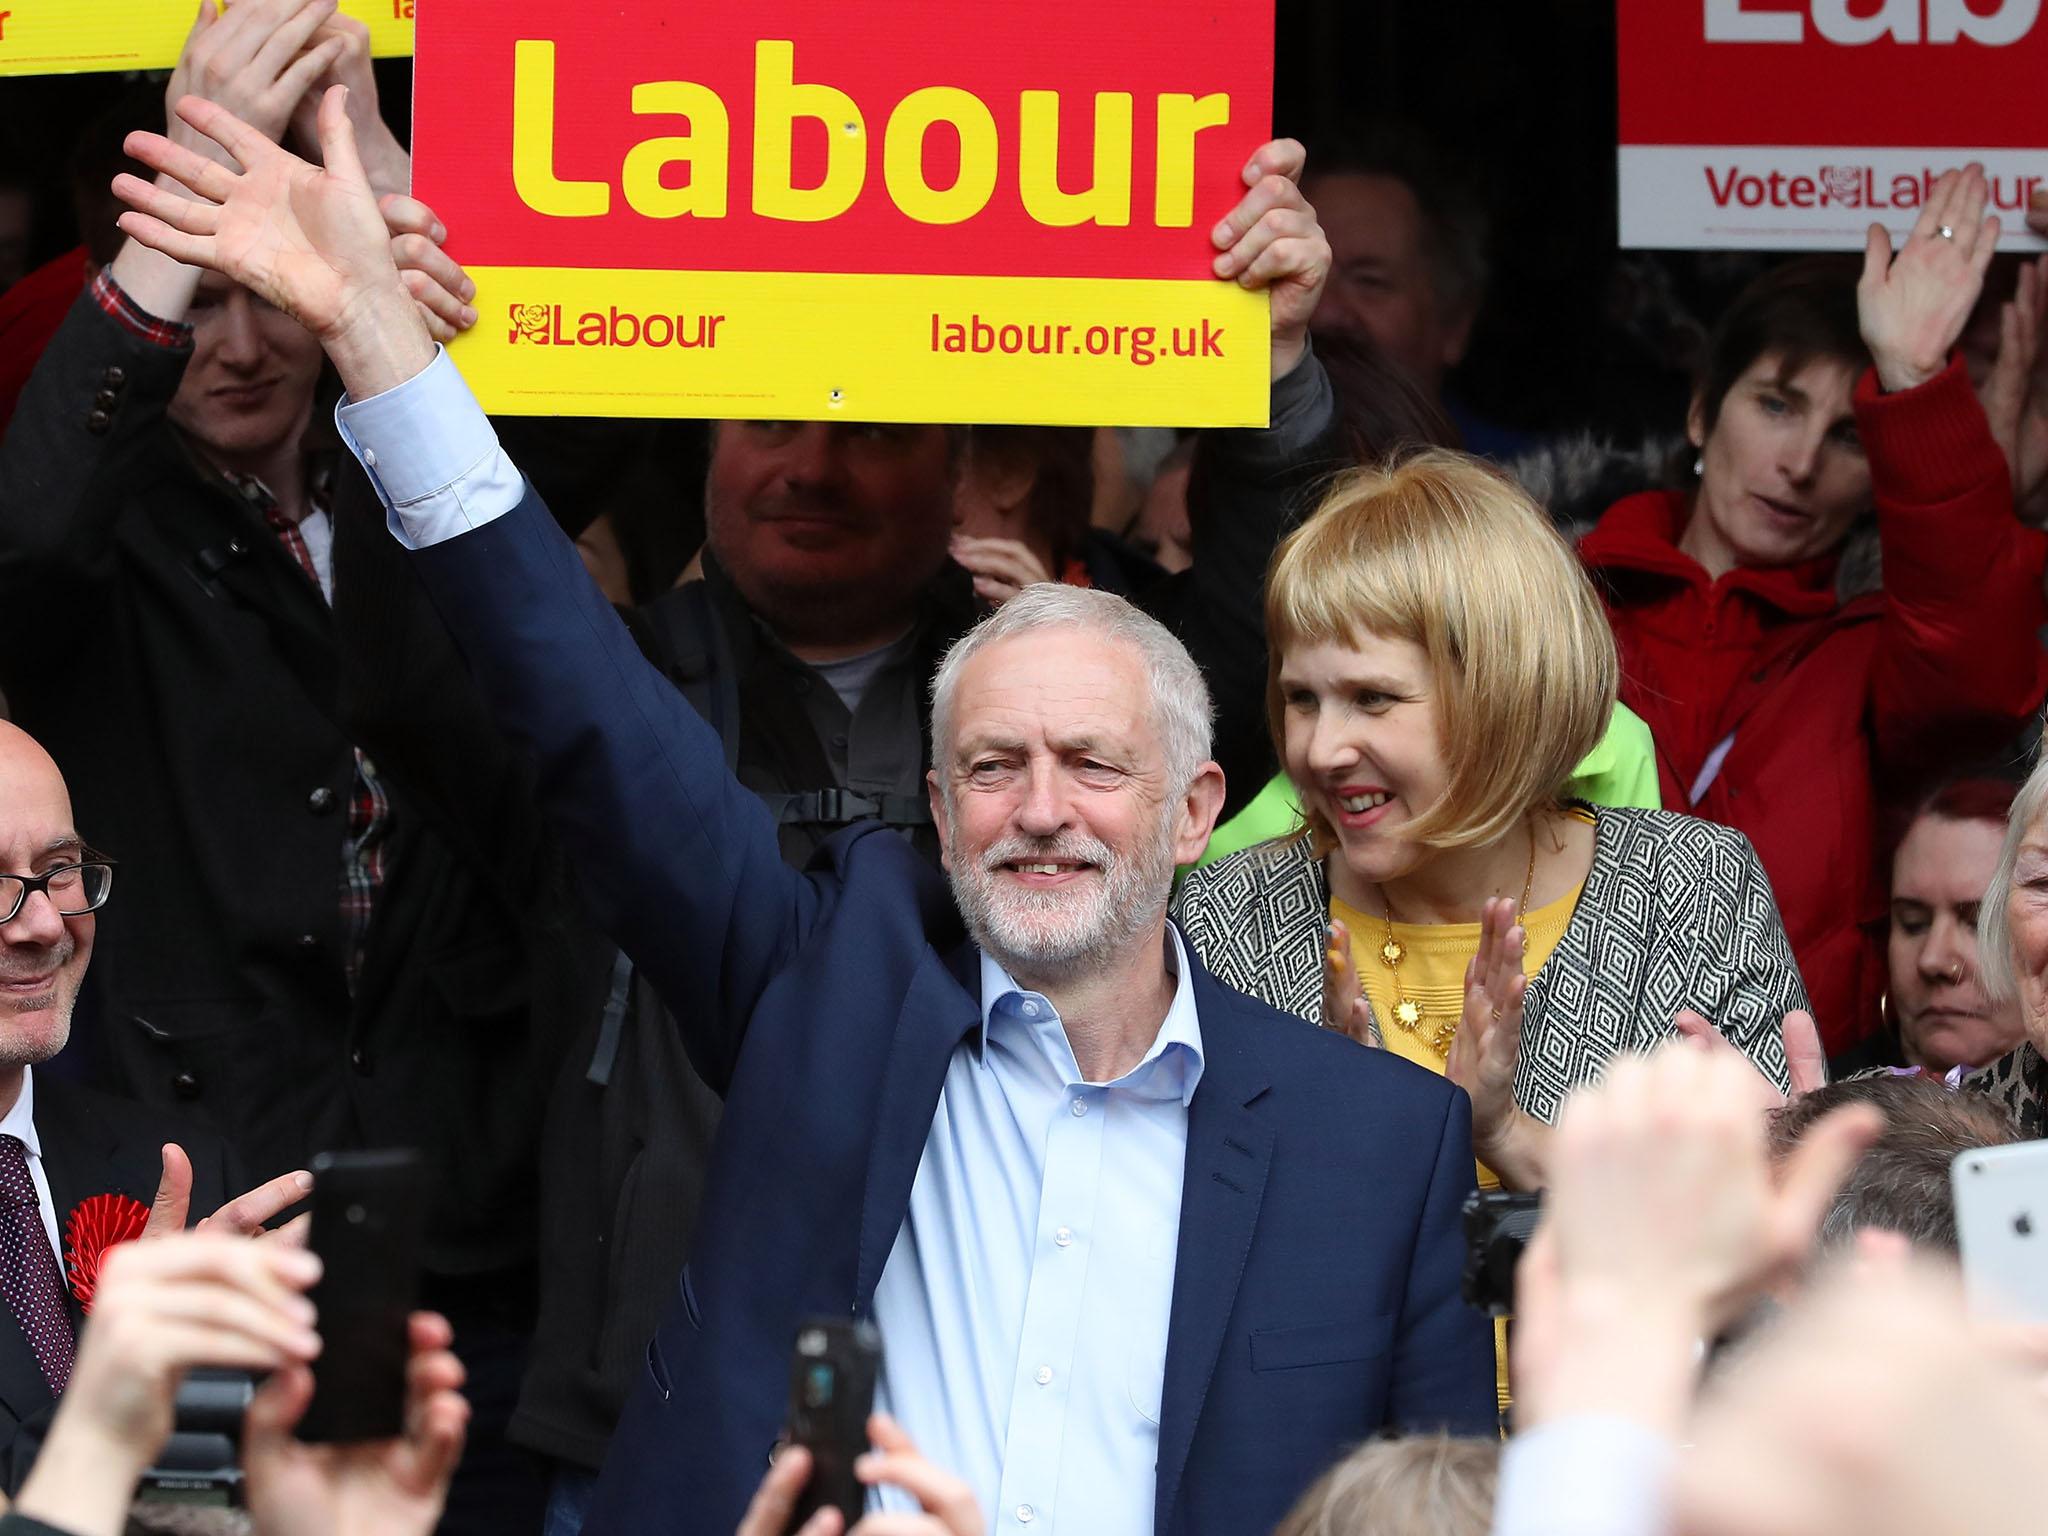 Jeremy Corbyn is impressing on the doorstep, while Theresa May has been accused of hiding from her voters on the campaign trail